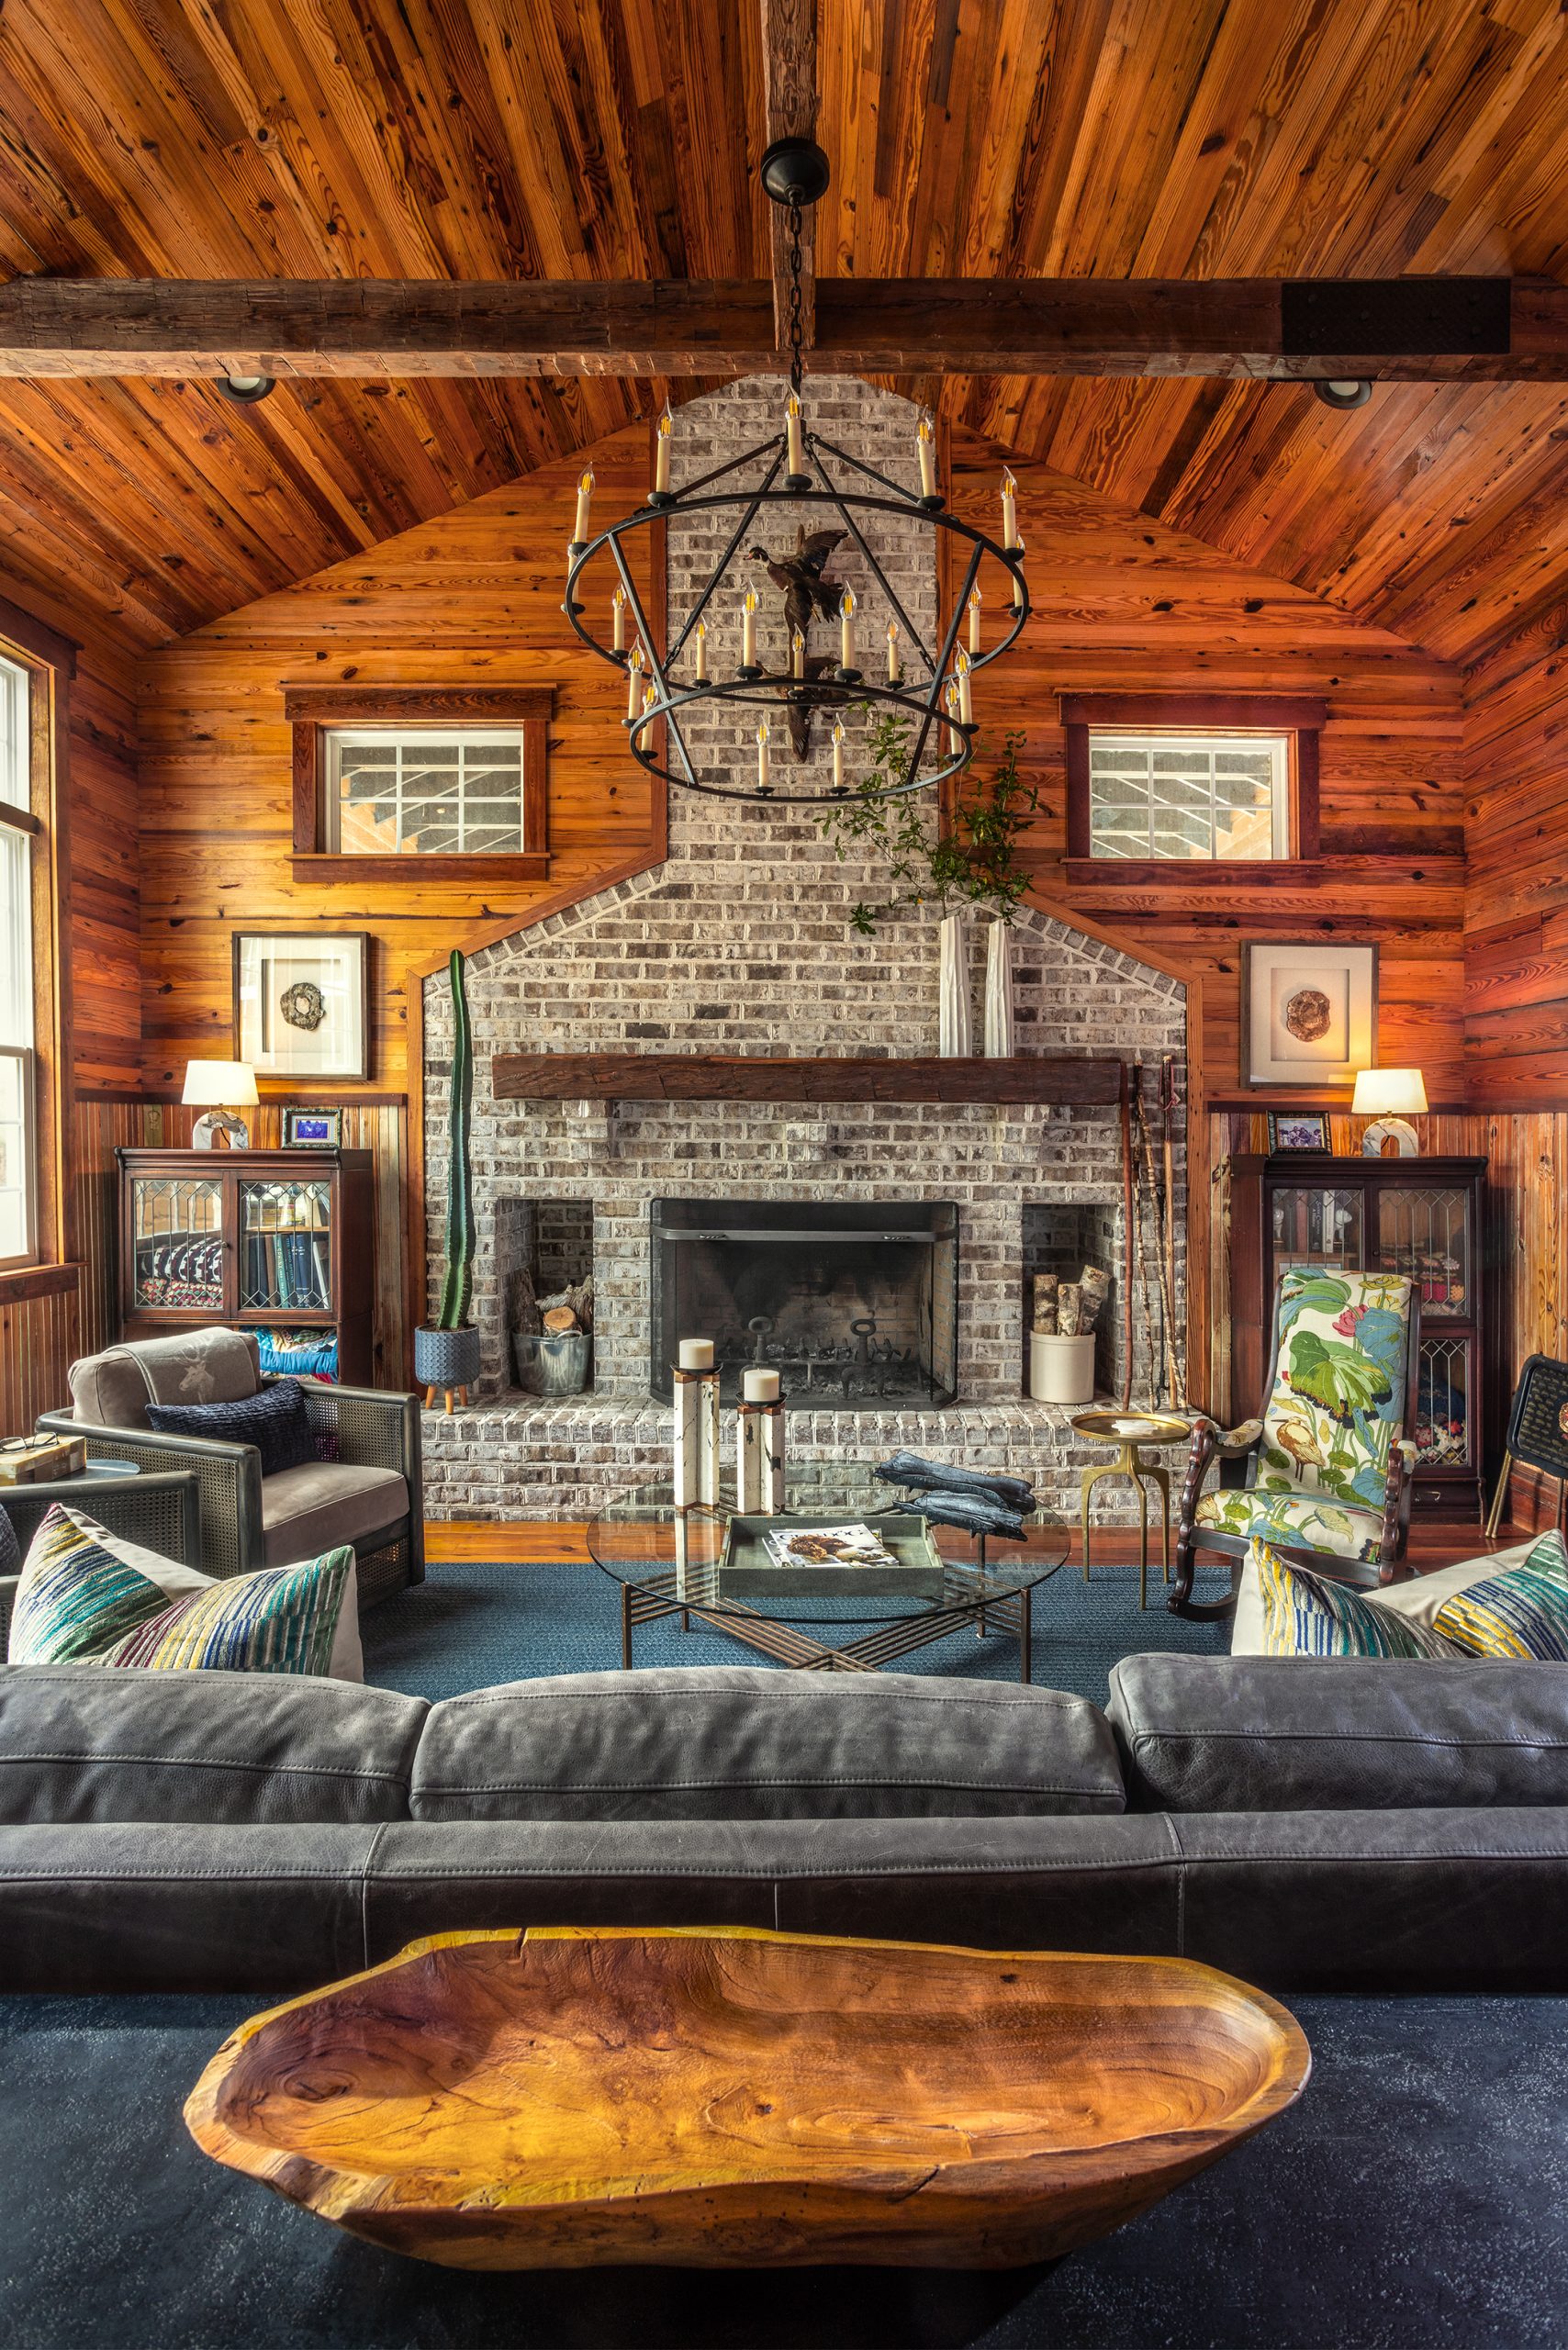 The retreat, refurbished by Steven Ford, features a traditional hunting lodge-inspired living room centered around a handsome fireplace with a mantel made from a reclaimed hand-hewn cypress beam, found in a former sharecropper’s house on the property. Mounted ducks that Ben hunted as a child are placed high above the fireplace.